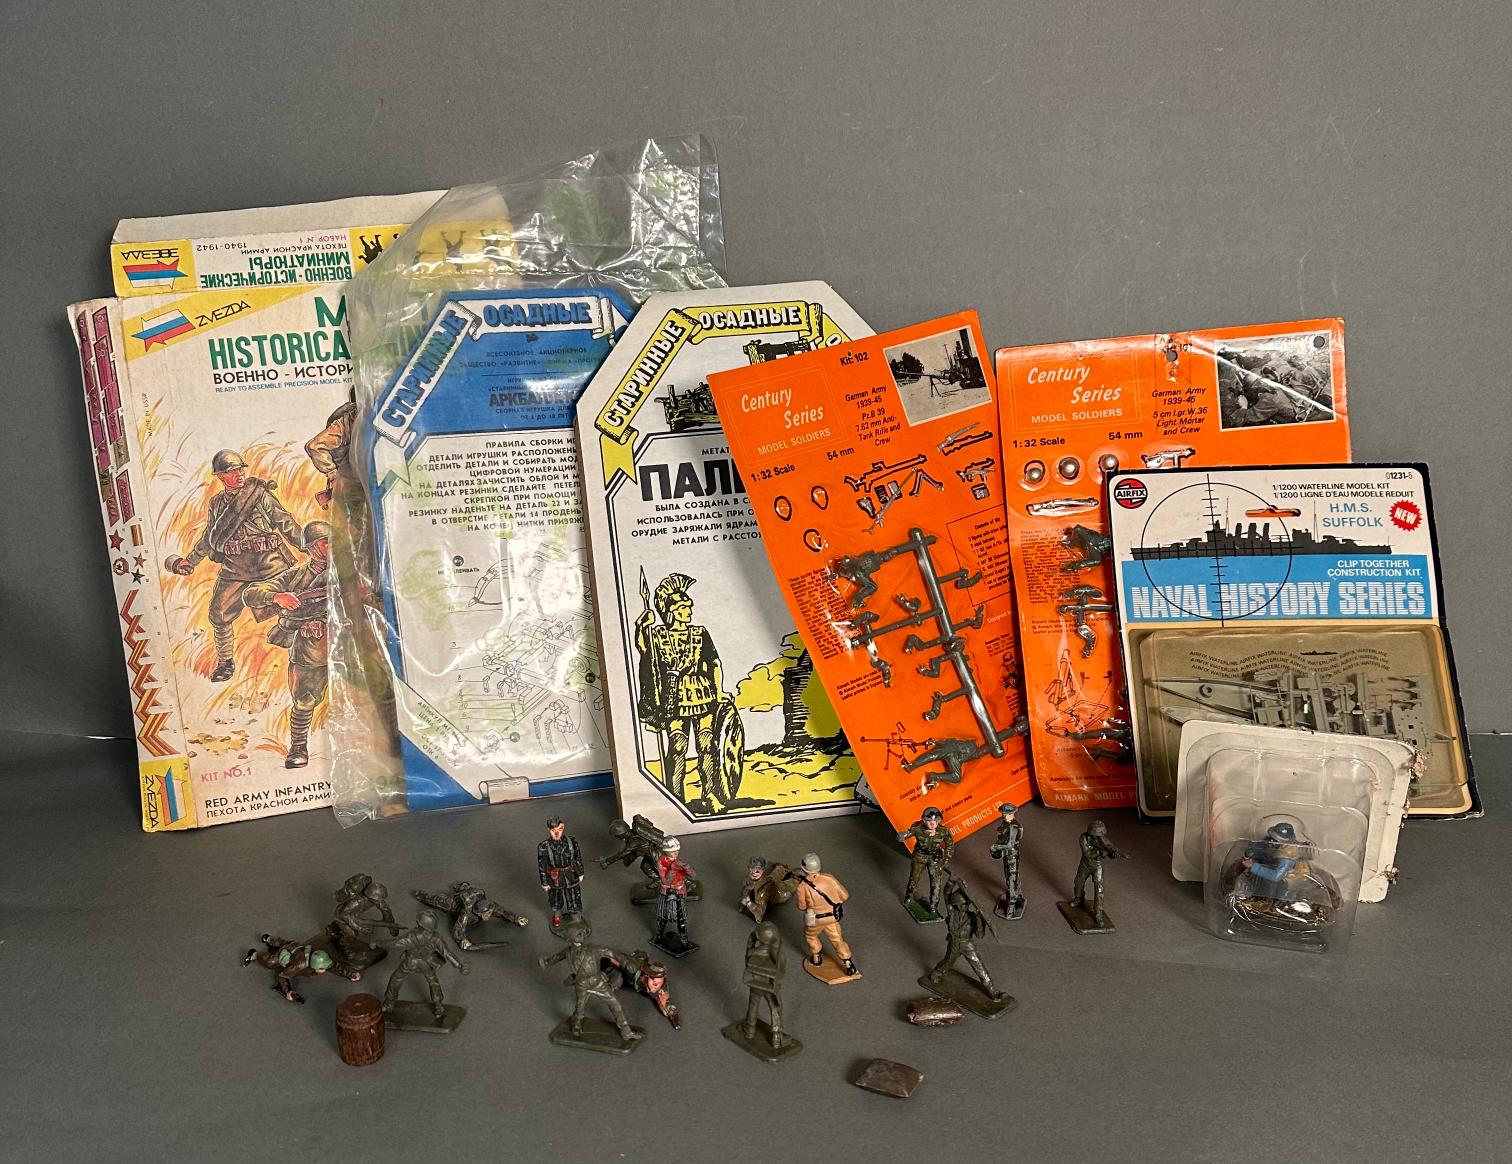 A selection of military model kits and toy soldiers to include Airfix, Century Series and some